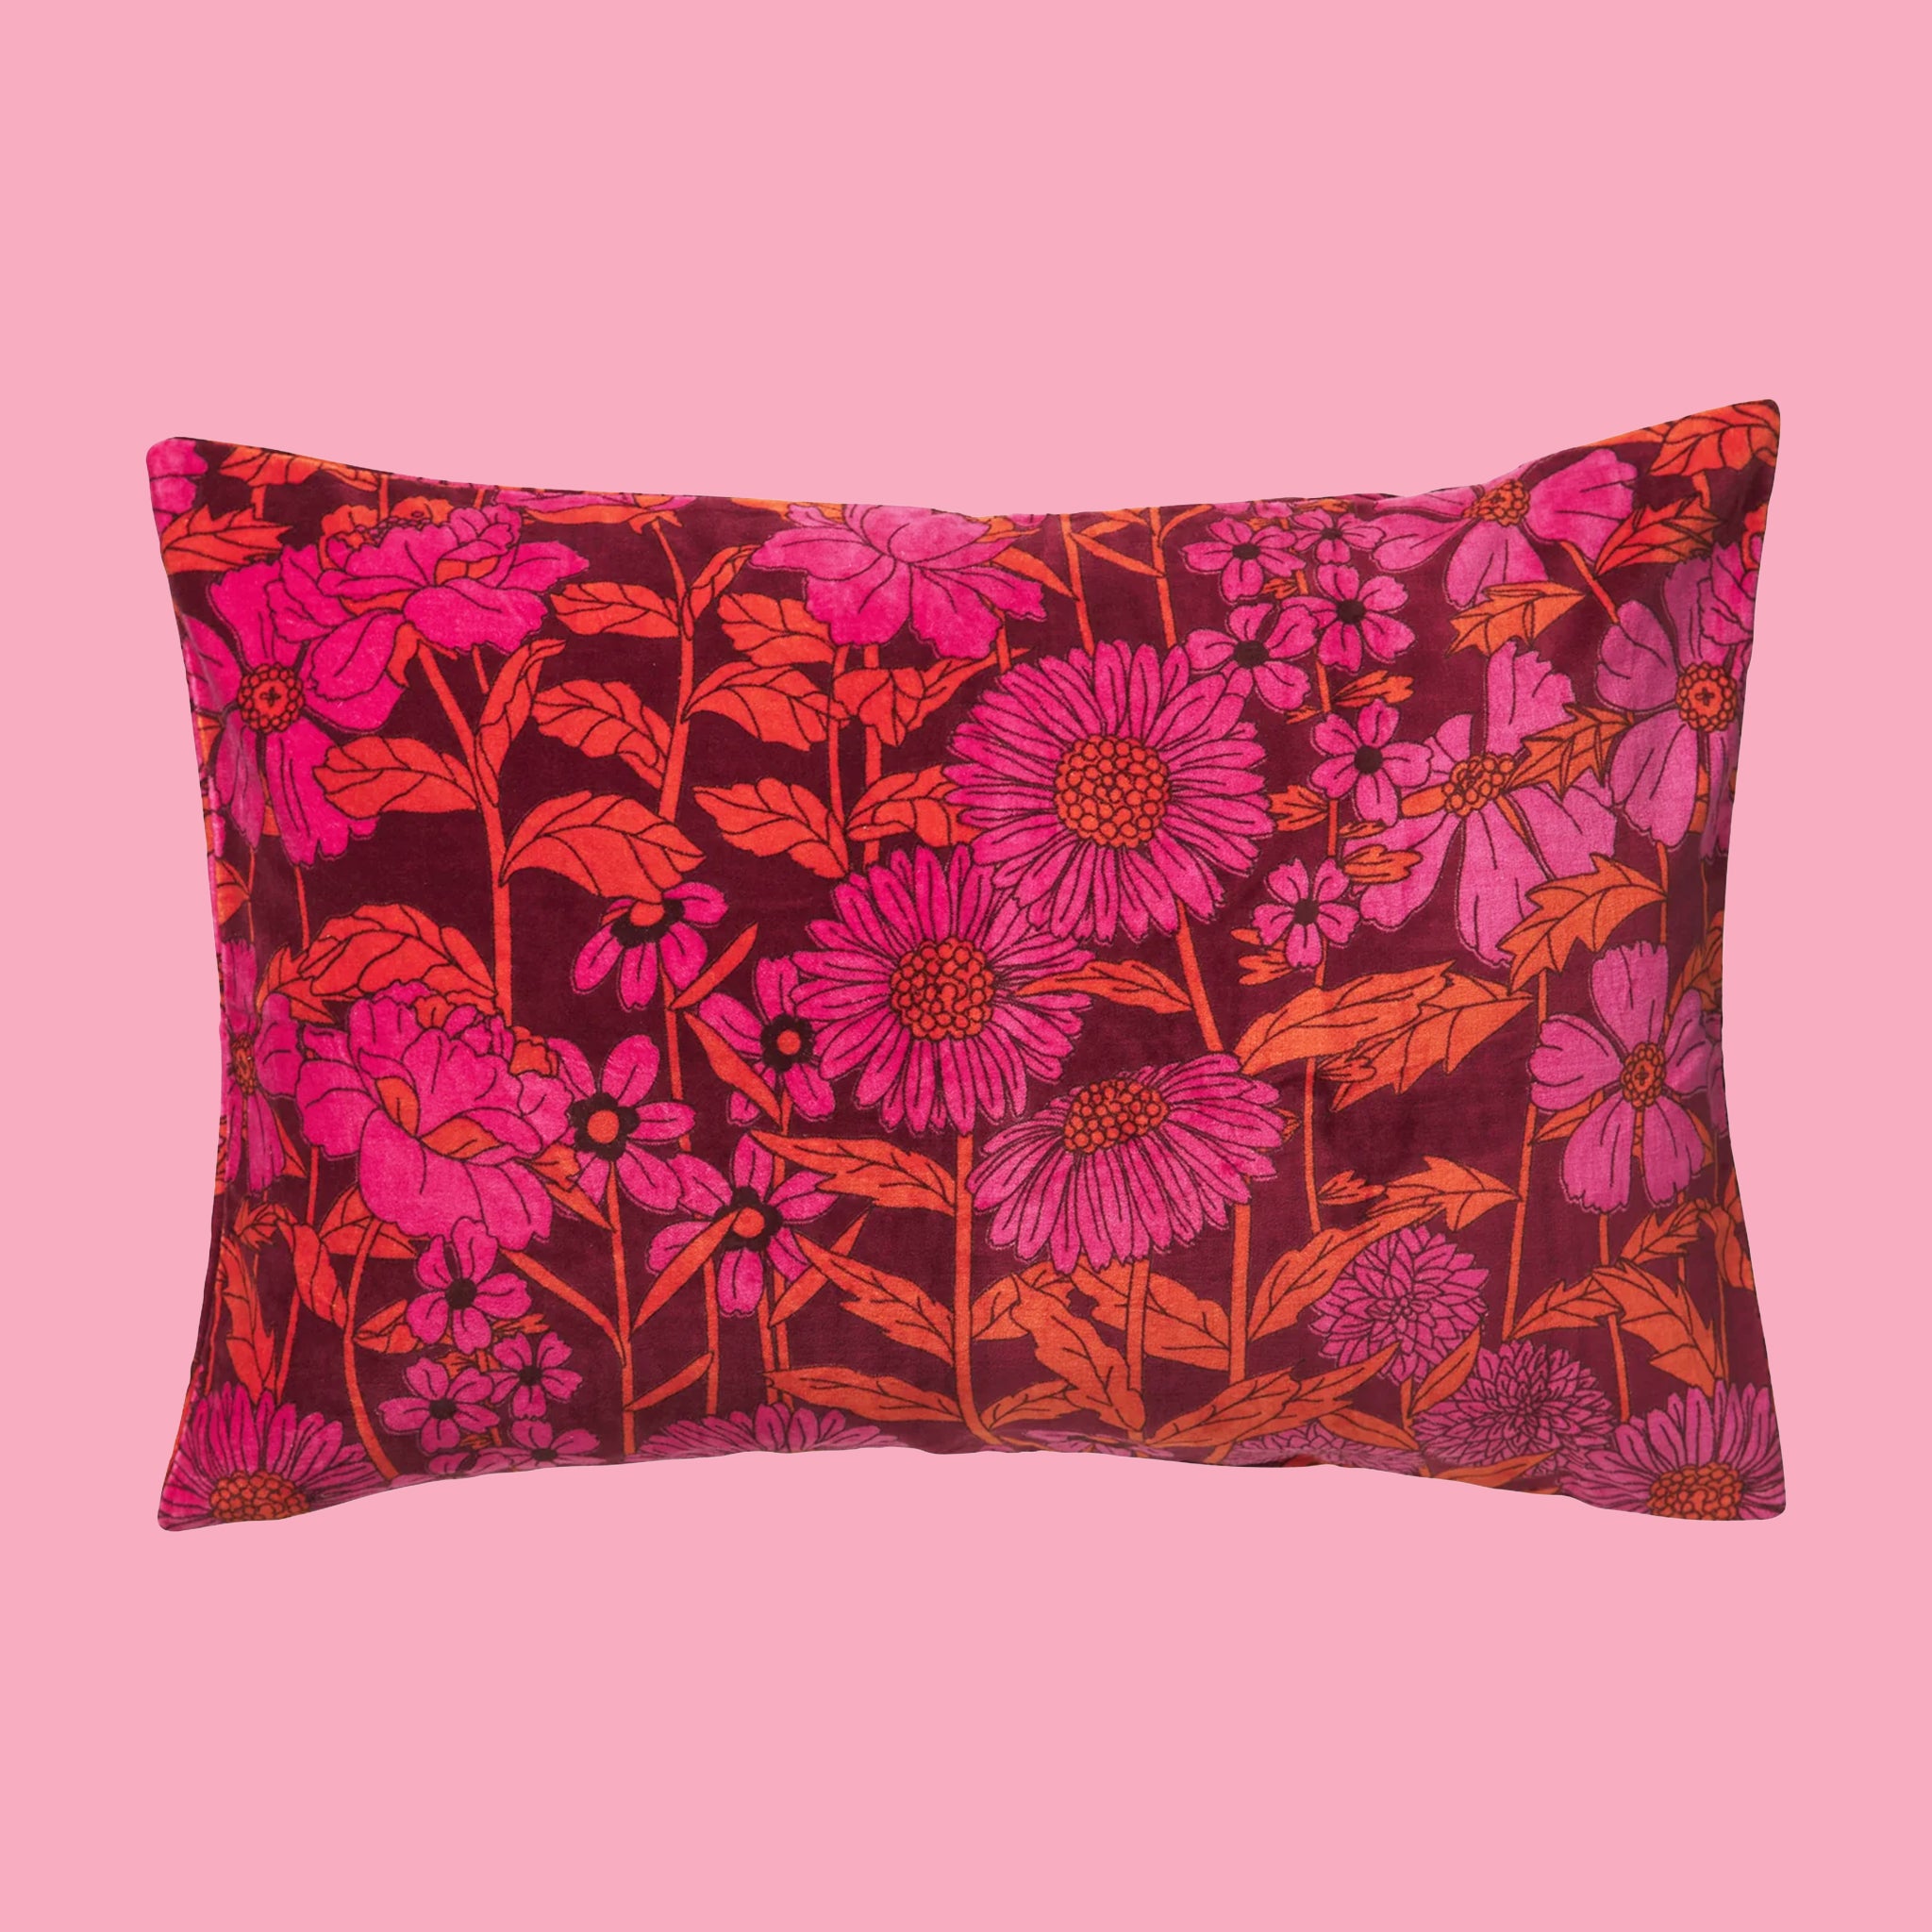 A pink and orange floral print pillowcase. 